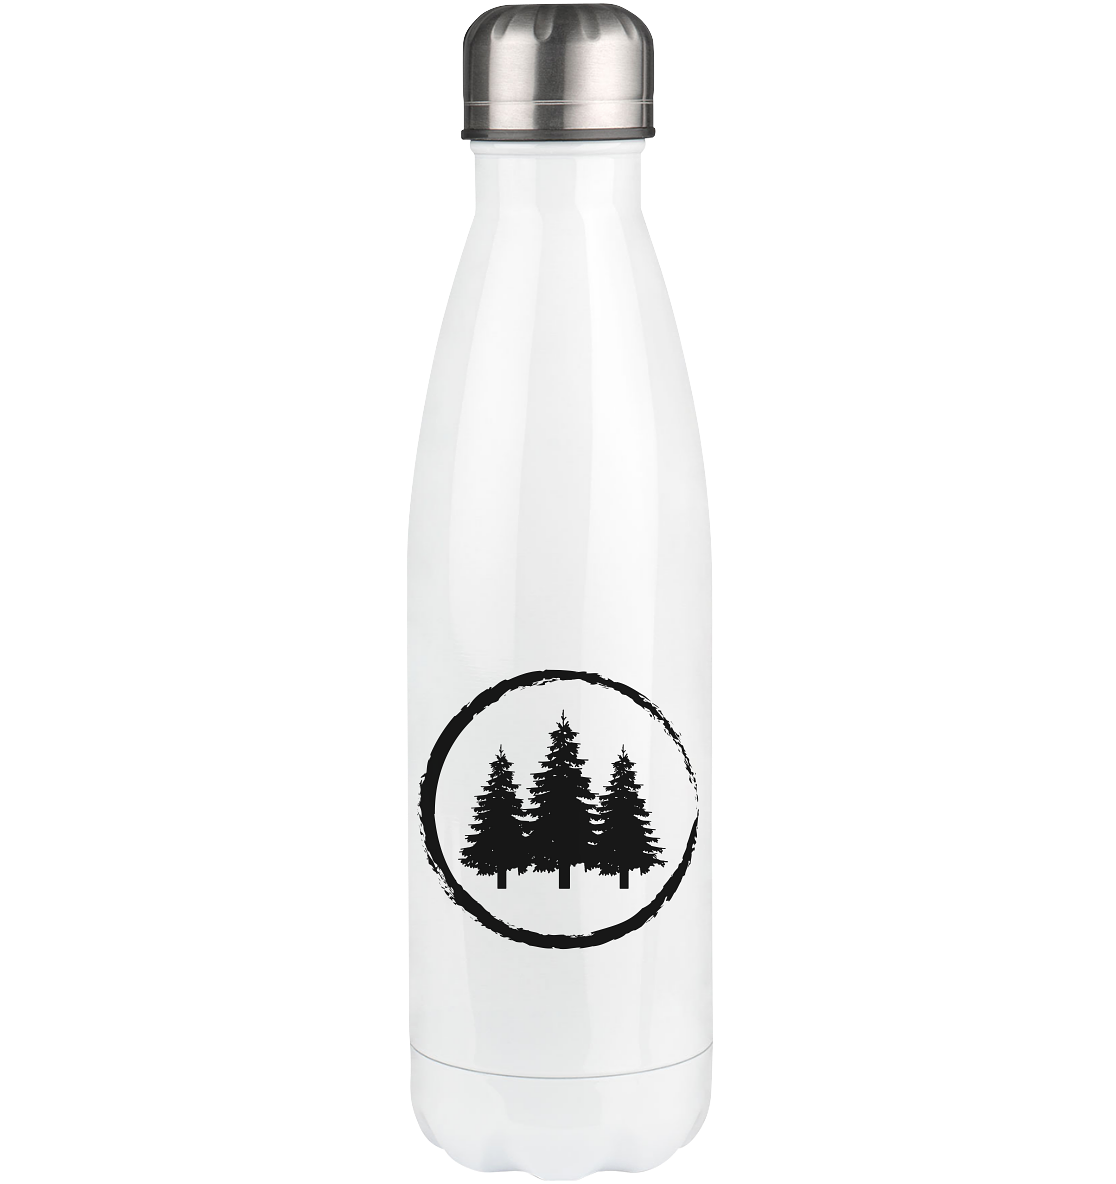 Cricle and Trees - Edelstahl Thermosflasche camping UONP 500ml